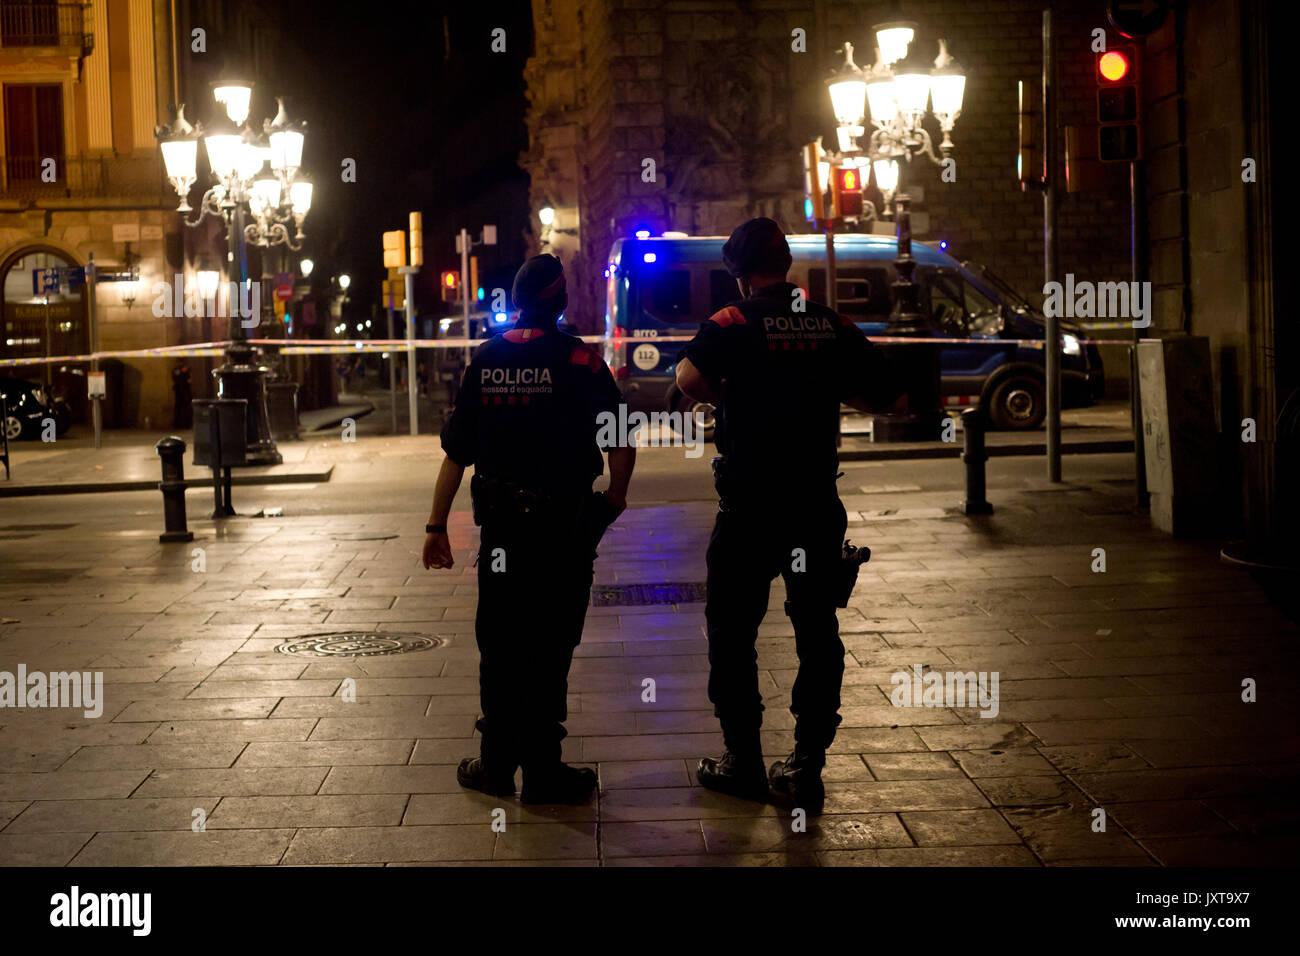 Barcelona, Catalonia, Spain. 17th Aug, 2017. Police officers patrol Las Ramblas area of Barcelona where there has been a terrorist attack. Thirteen people are dead and at least 50 injured after a van rammed into the crowd of Las Ramblas street in Barcelona. Credit: Jordi Boixareu/ZUMA Wire/Alamy Live News Stock Photo